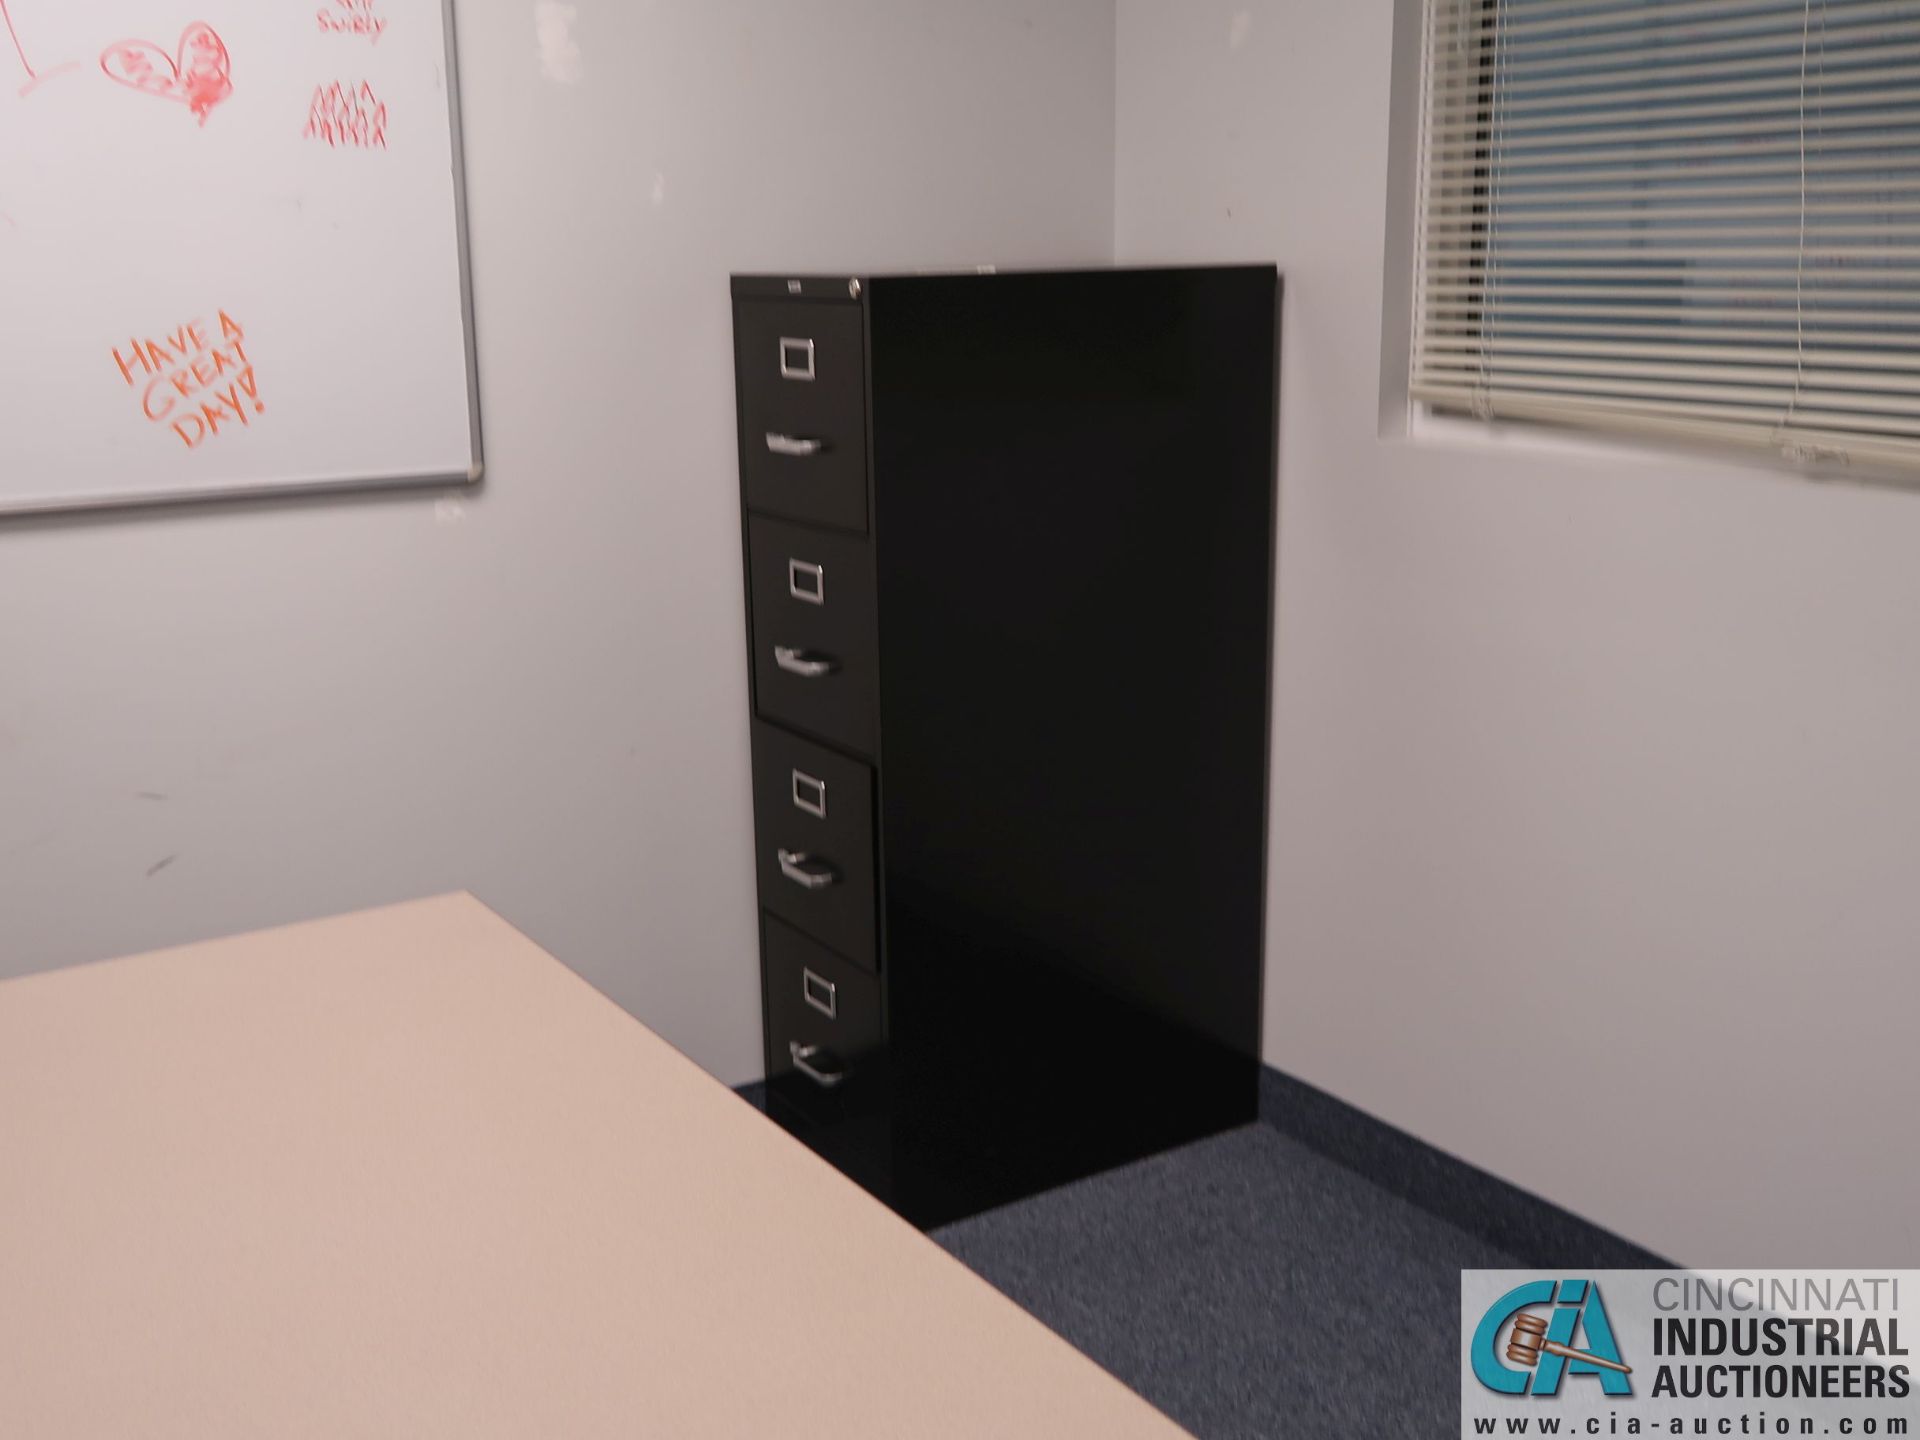 (LOT) L-SHAPED MODULAR DESK WITH CHAIR, BOOKCASE, AND FILING CABINETS ** NO DRY ERASE BOARD ** - Image 2 of 3